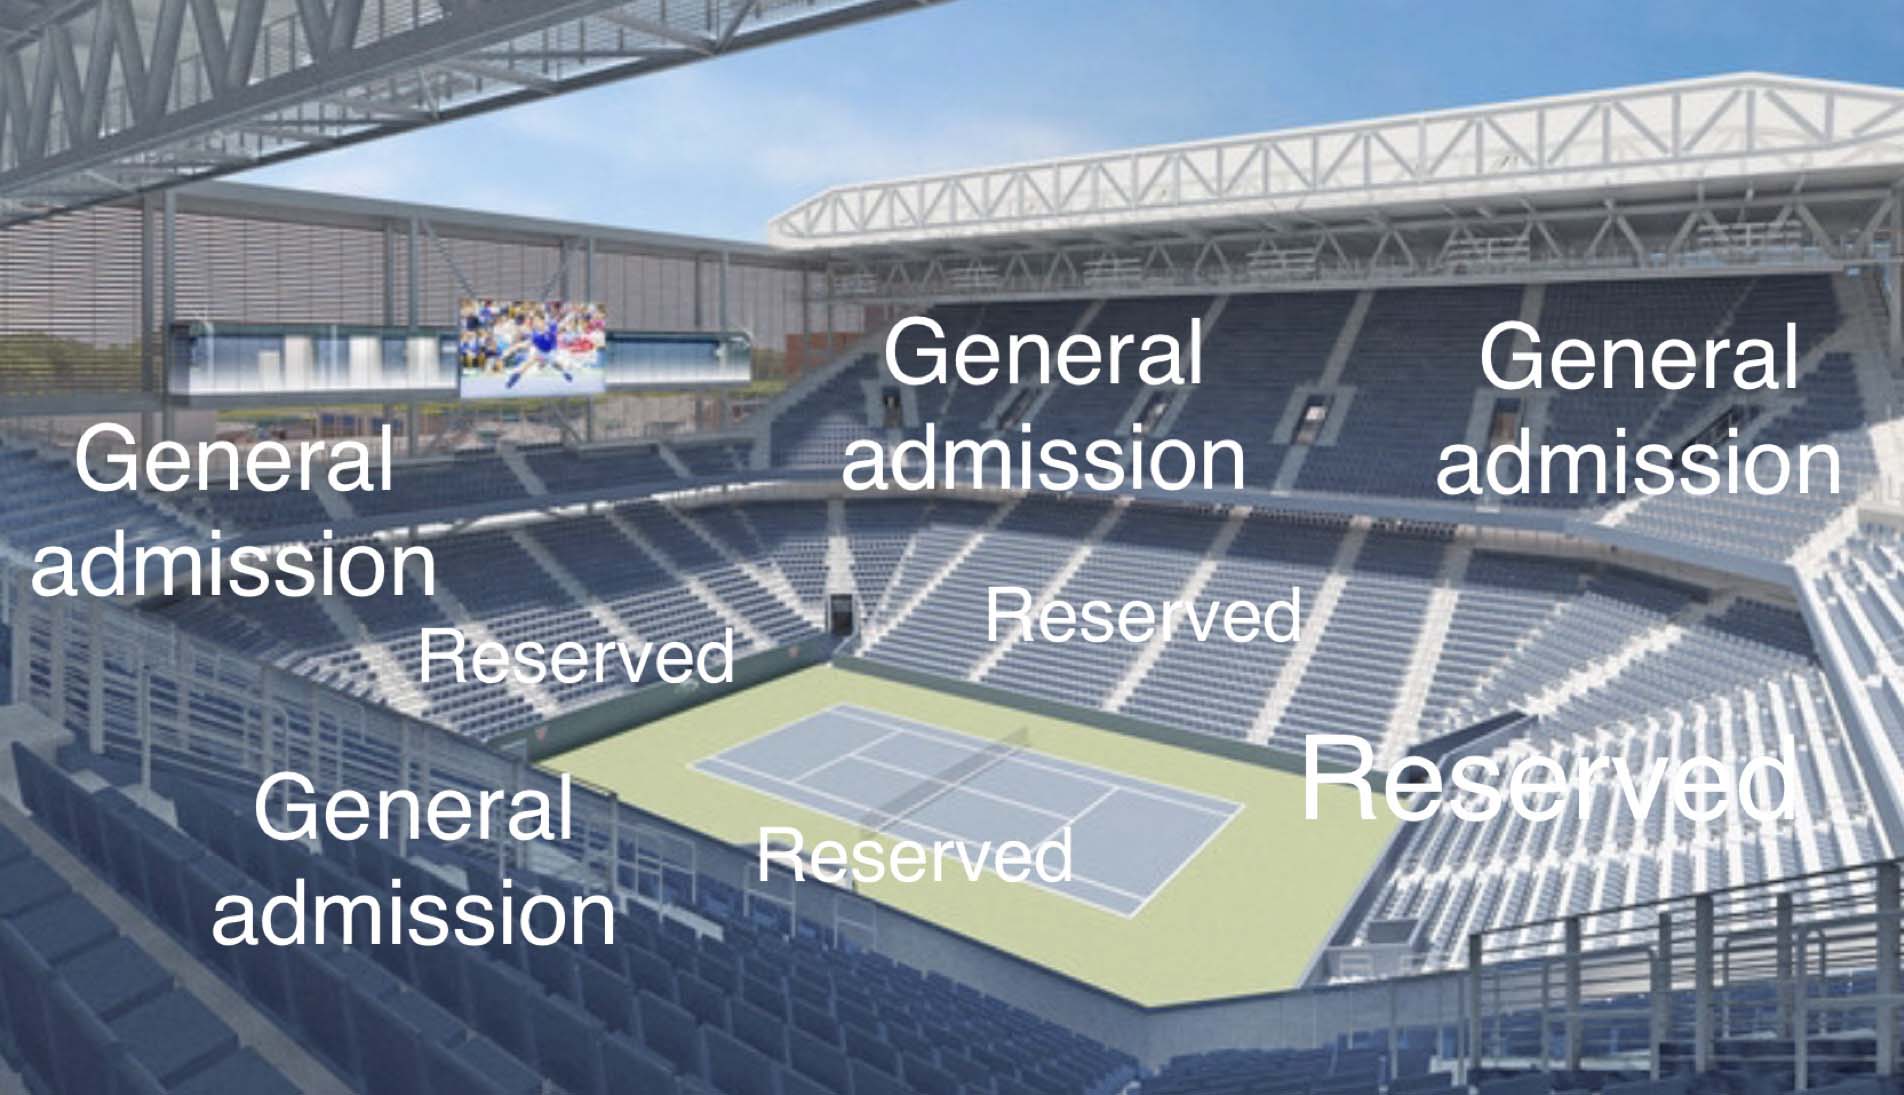 US Open Seating Levels